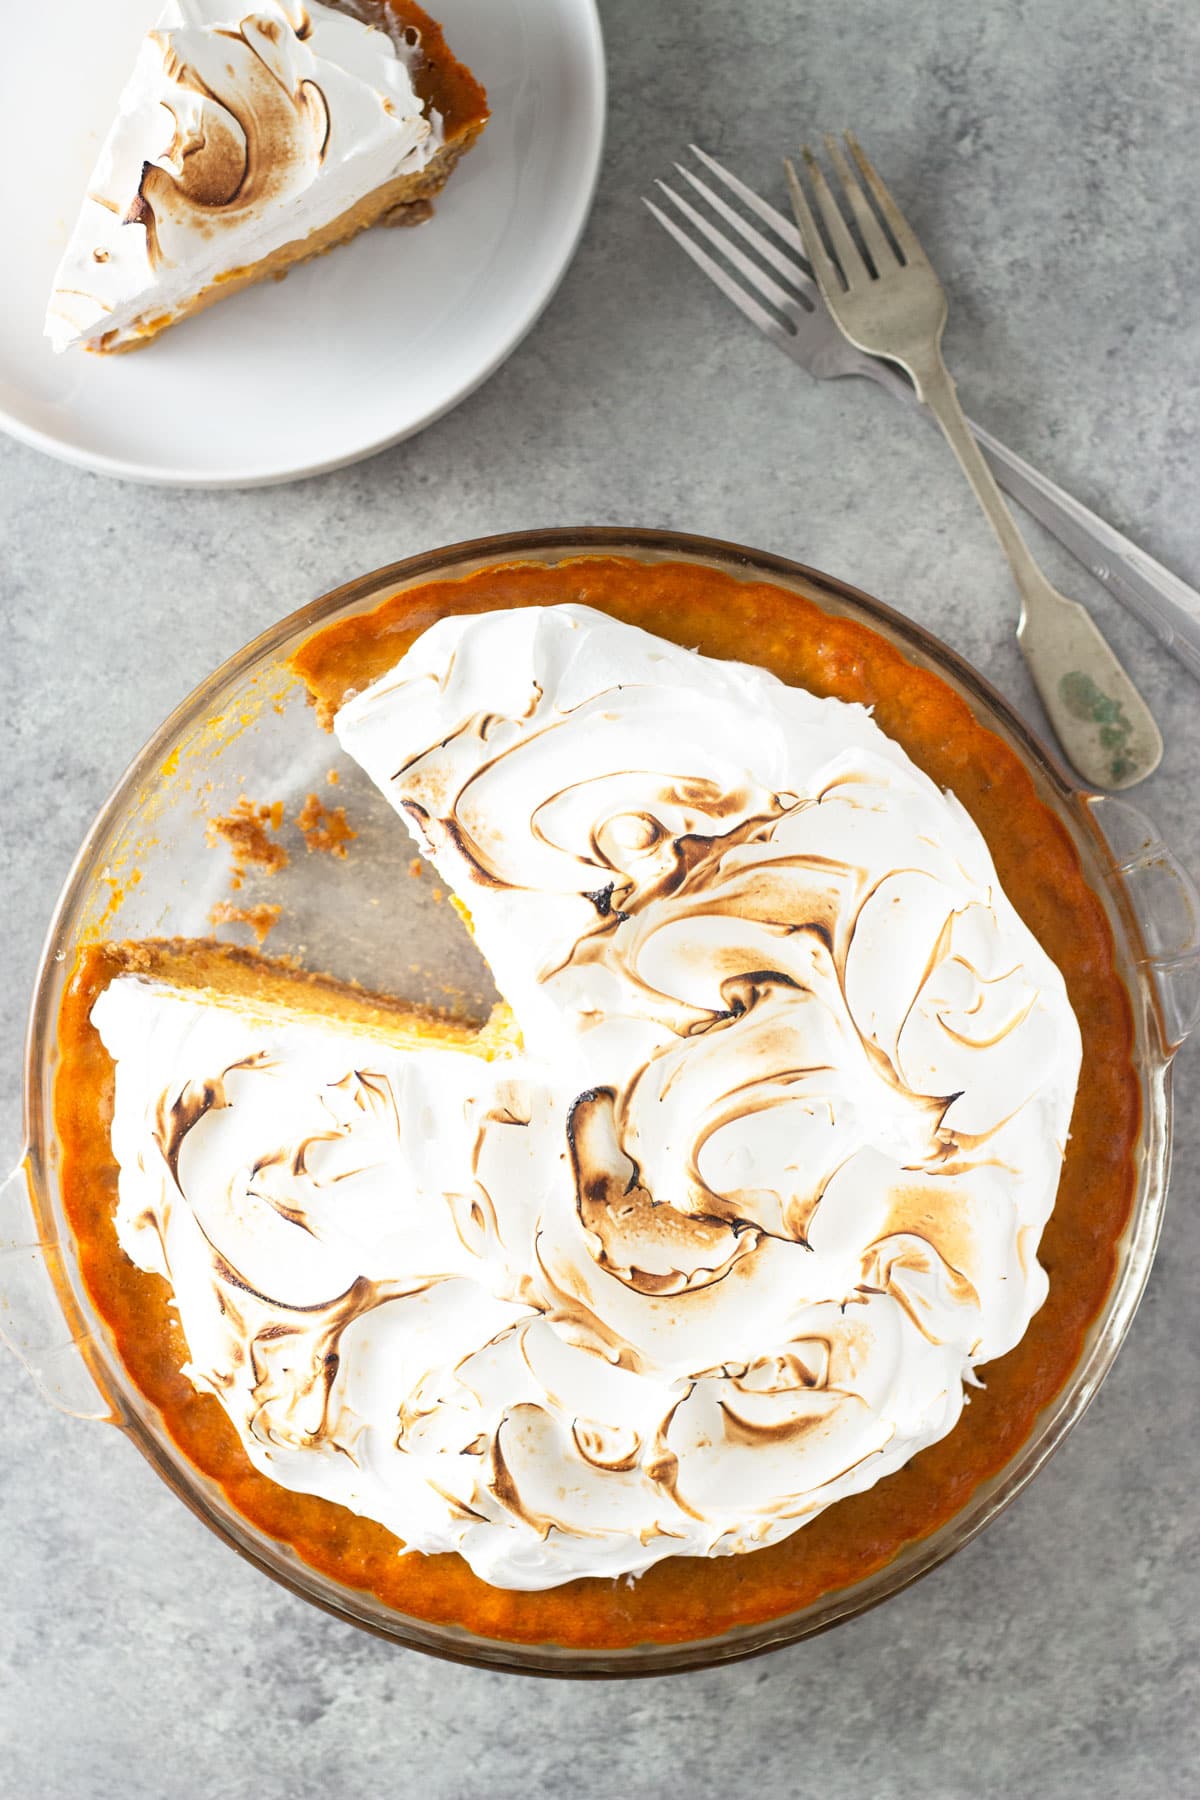 Overhead view of a pumpkin meringue pie with a slice cut out on a plate to the side on a grey, textured surface.